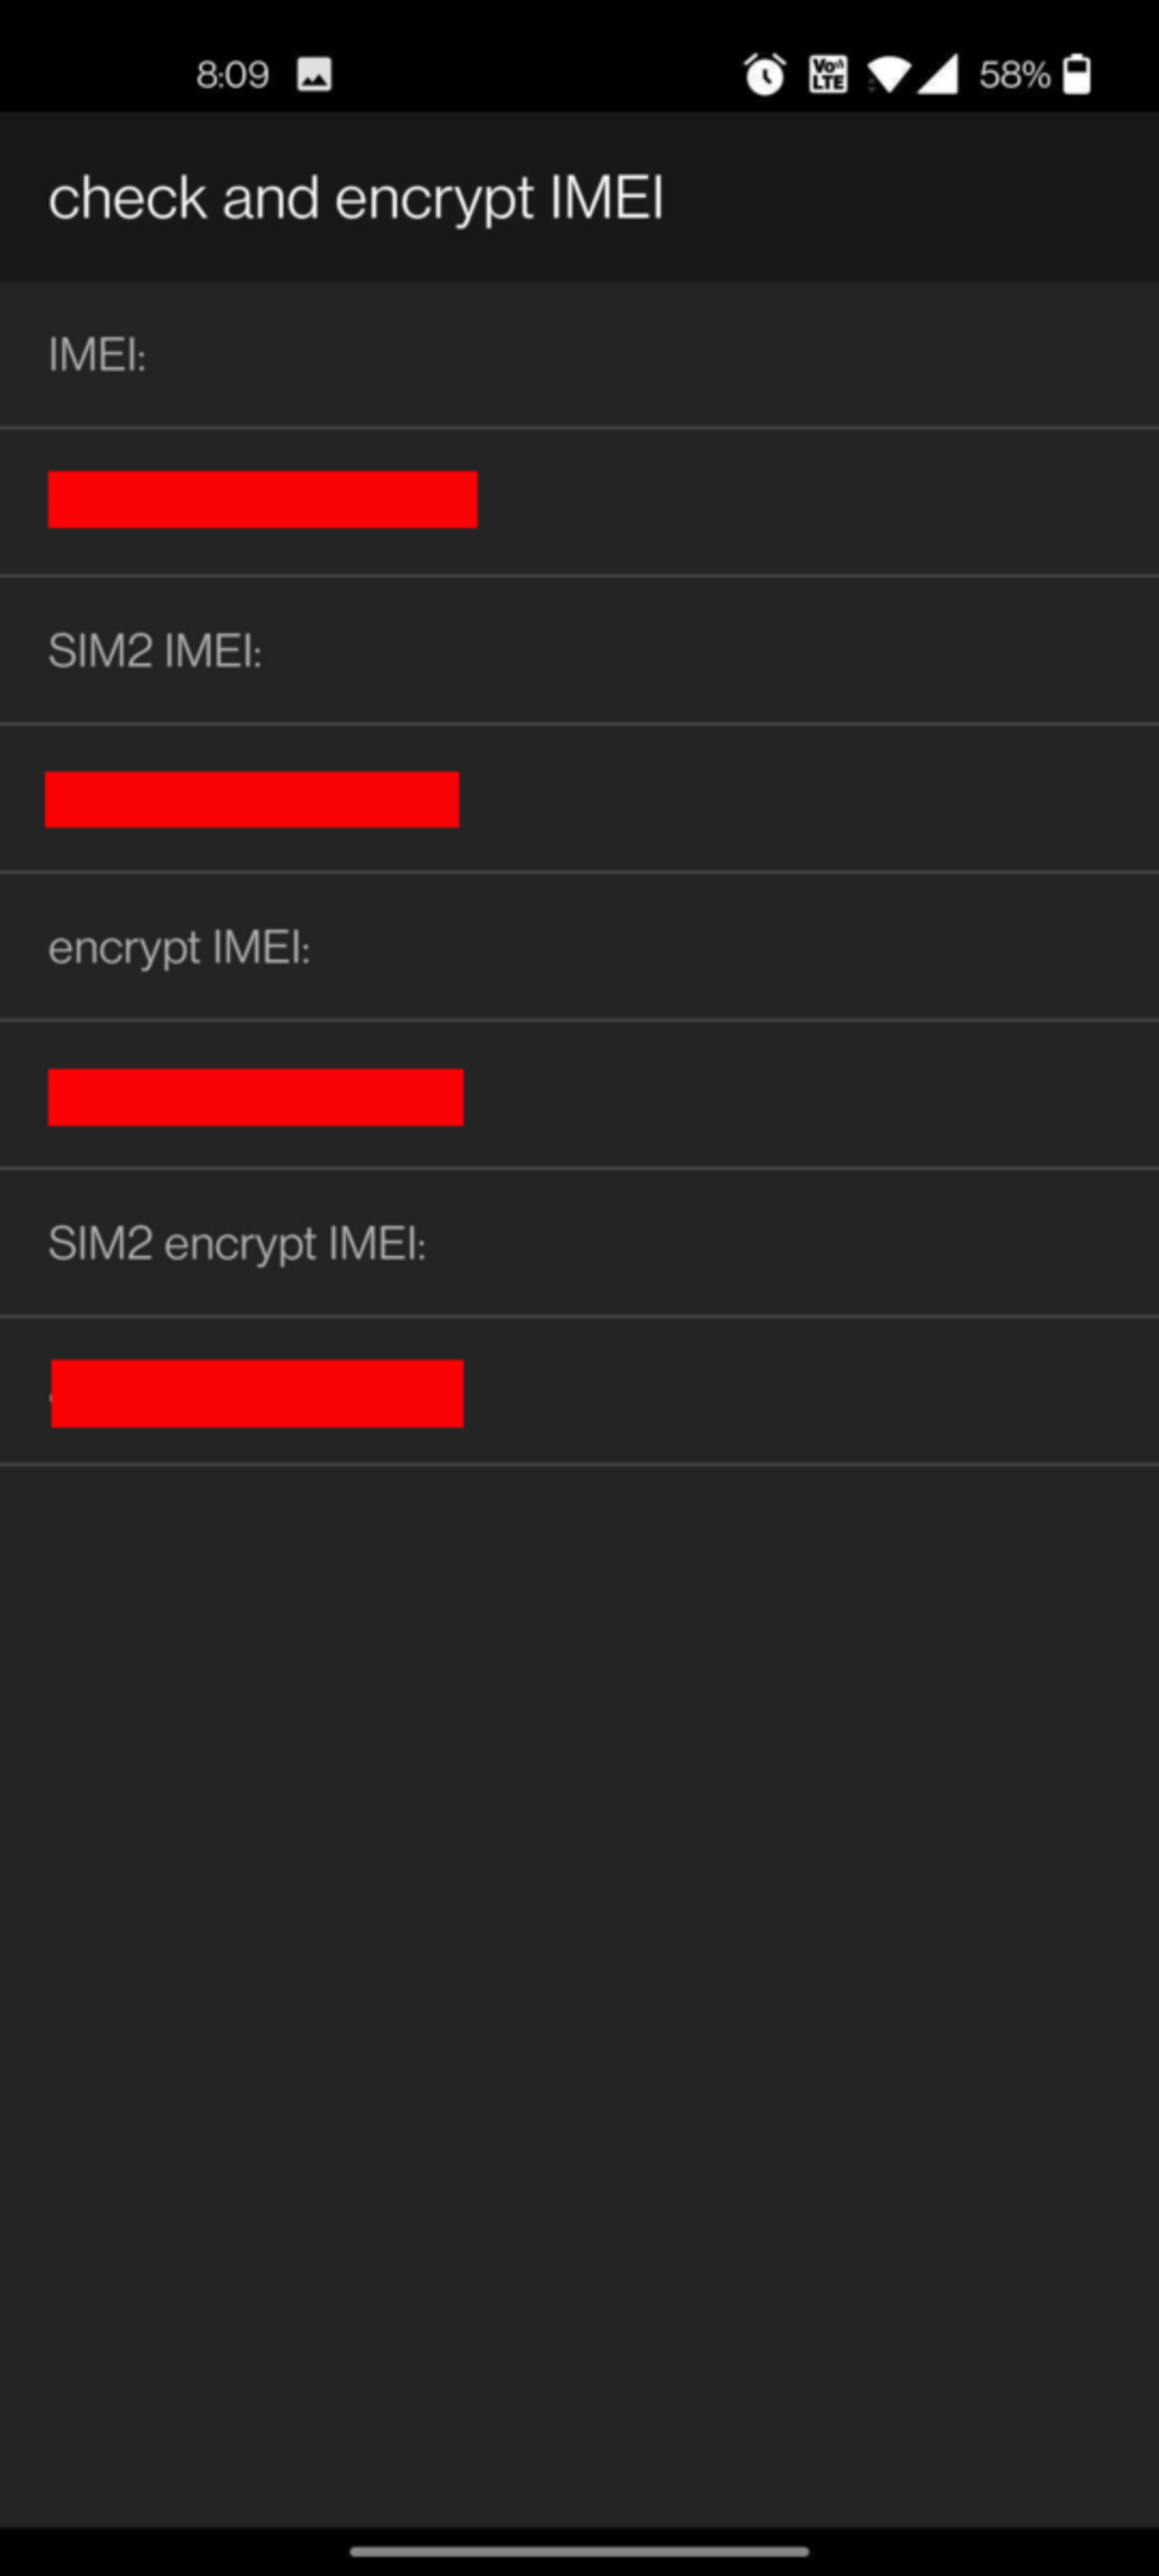 OnePlus-Android-hidden-code-IMEI-encrypted